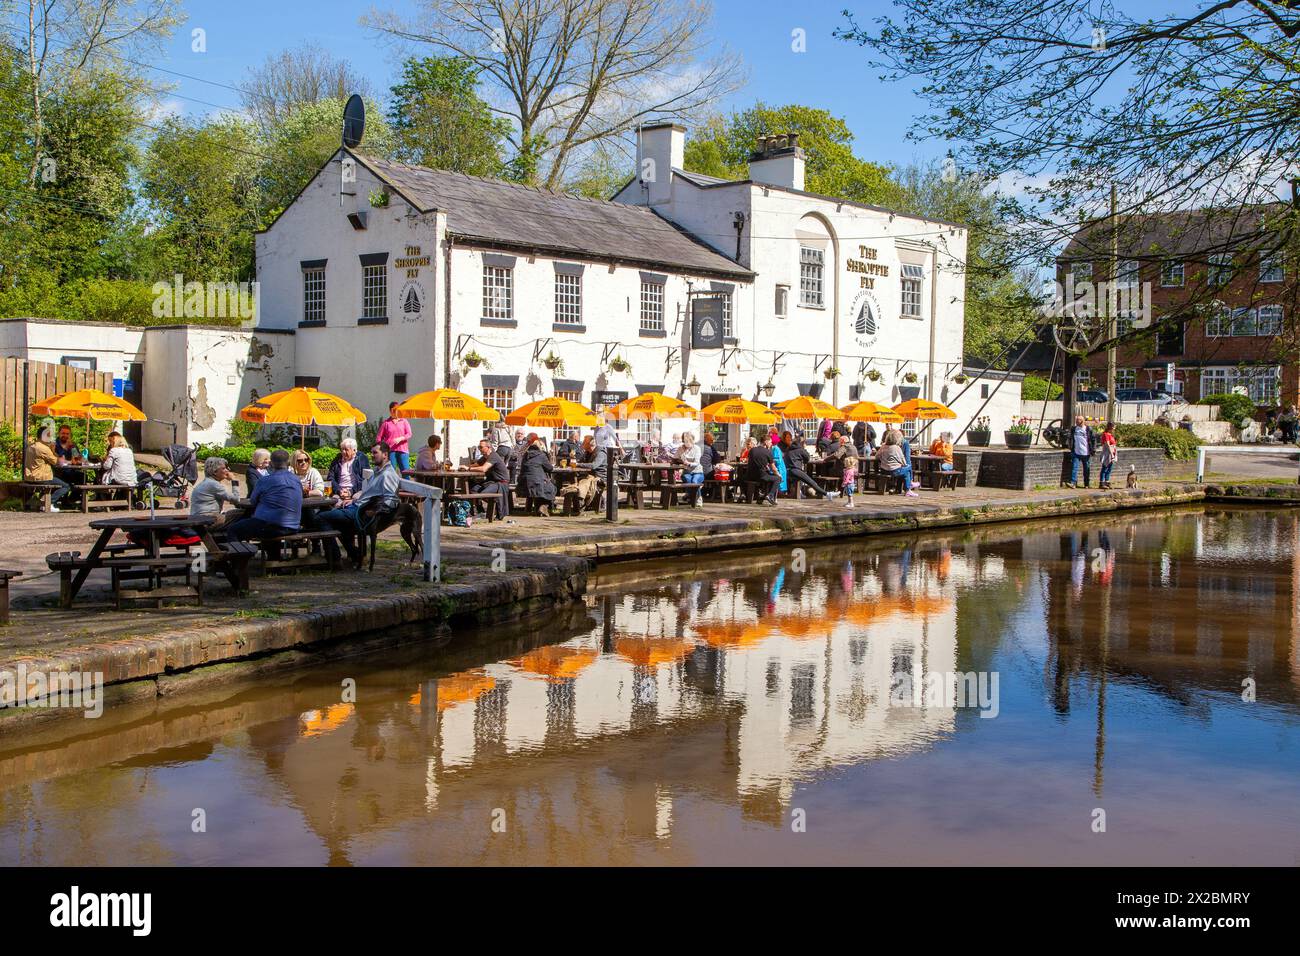 People sitting outside eating and drinking at the canalside pub the Shroppie fly in the Cheshire village of Audlem Cheshire England Stock Photo